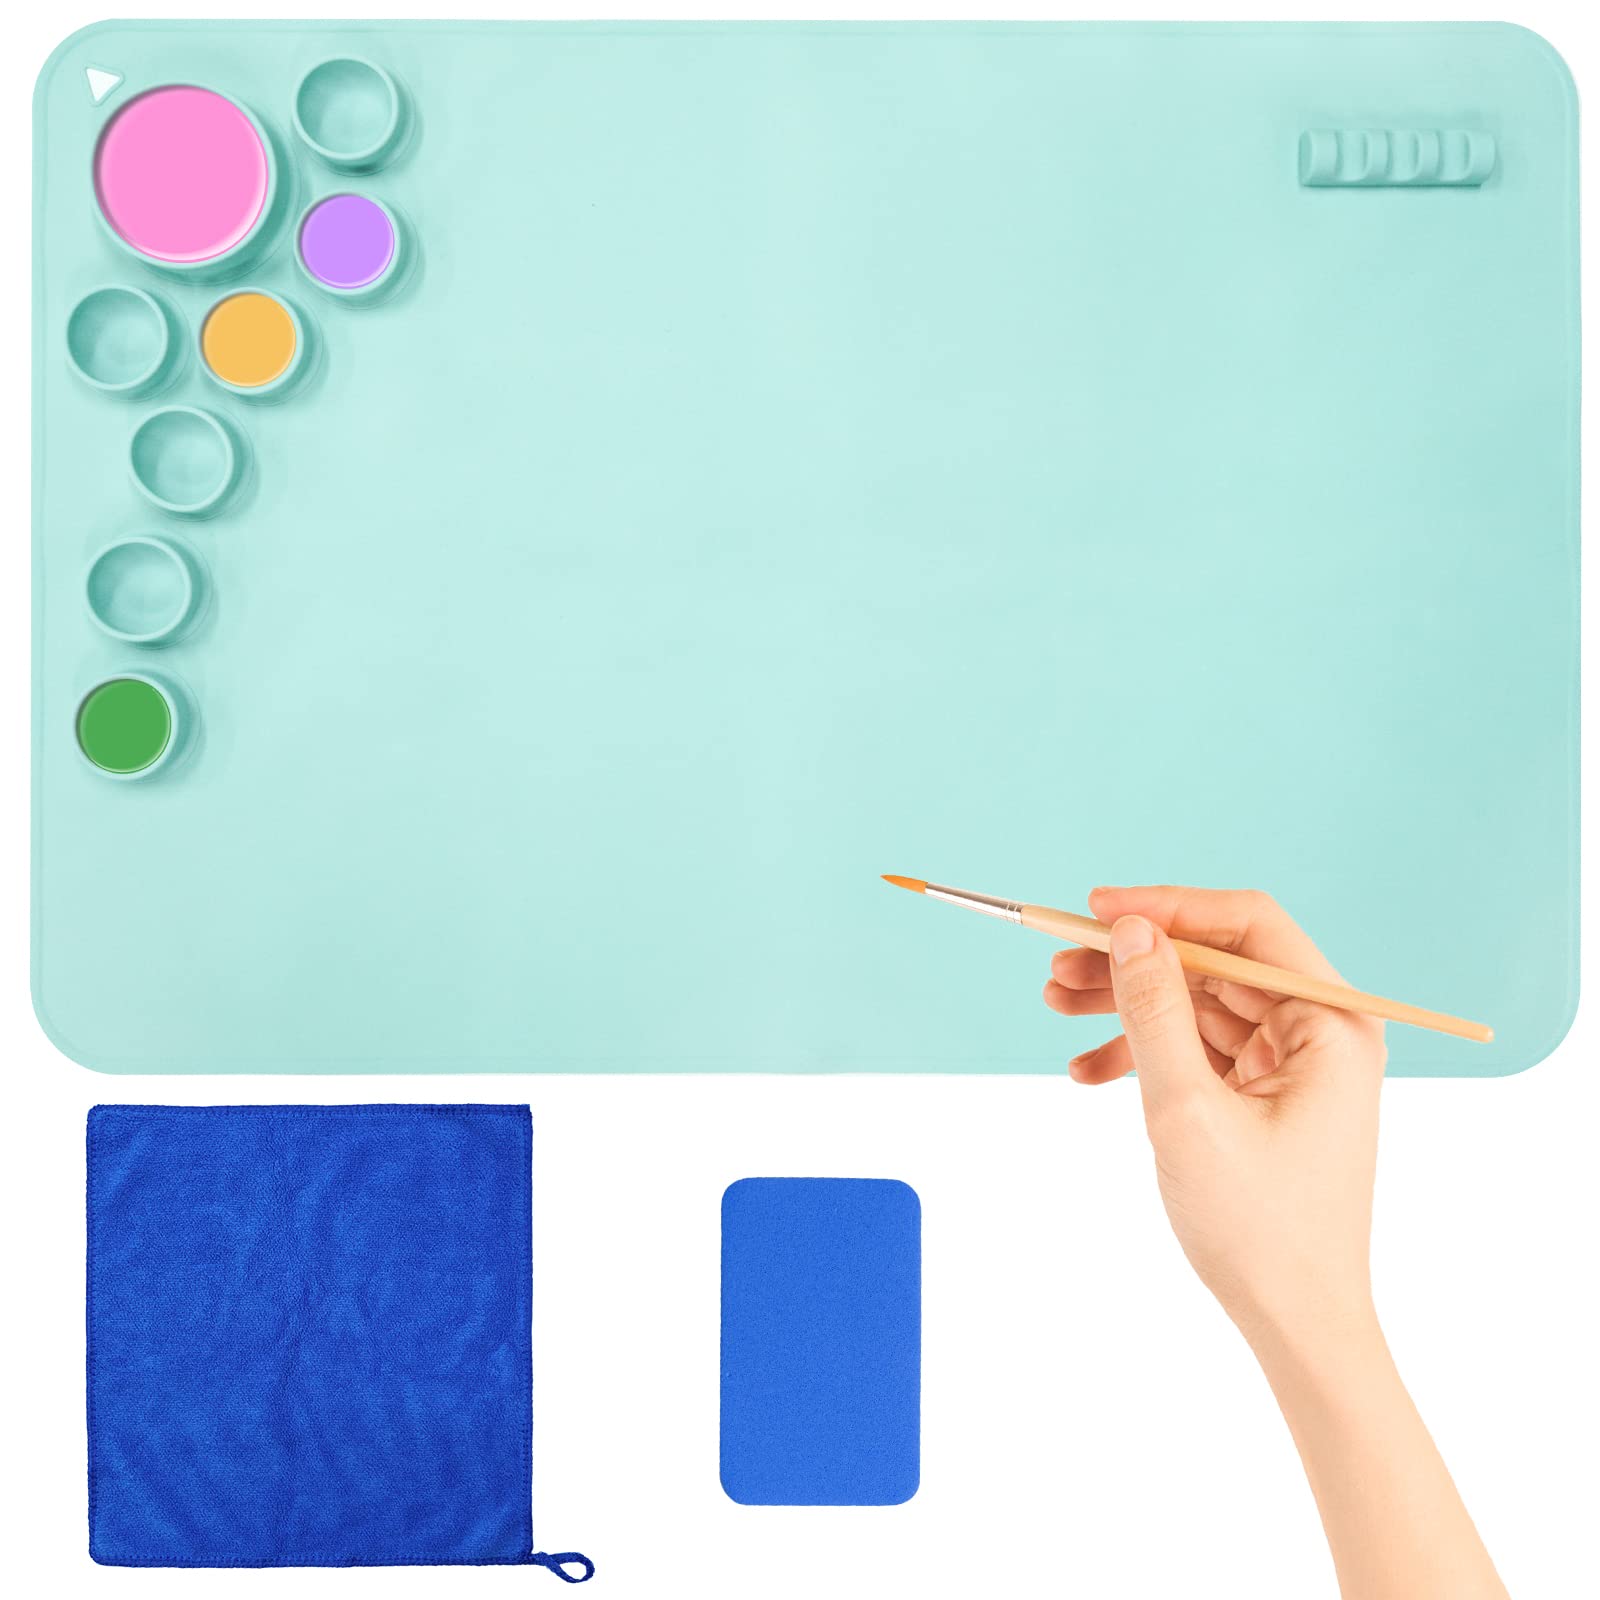 OSDUE Silicone Craft Mat, 24 x 16 Non-Stick Silicone Painting Mat, Large  Silicone Art Mat with Paint Cups and Pen Holder,Silicone Artist Mat for Kids  Gift Painting Clay DIY Creations - (Blue)